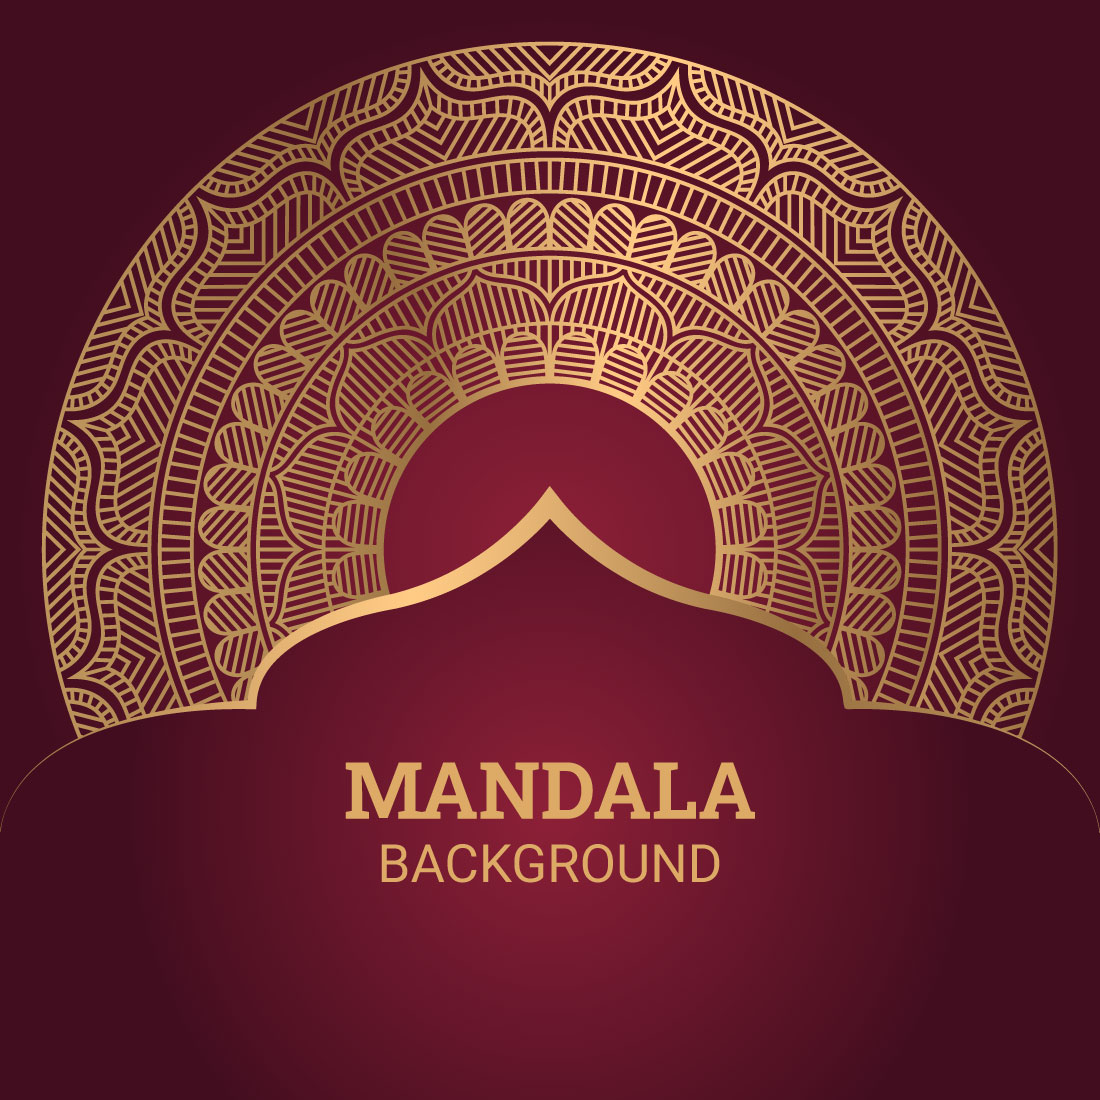 Luxury Mandala Vector with Golden Style Background cover image.